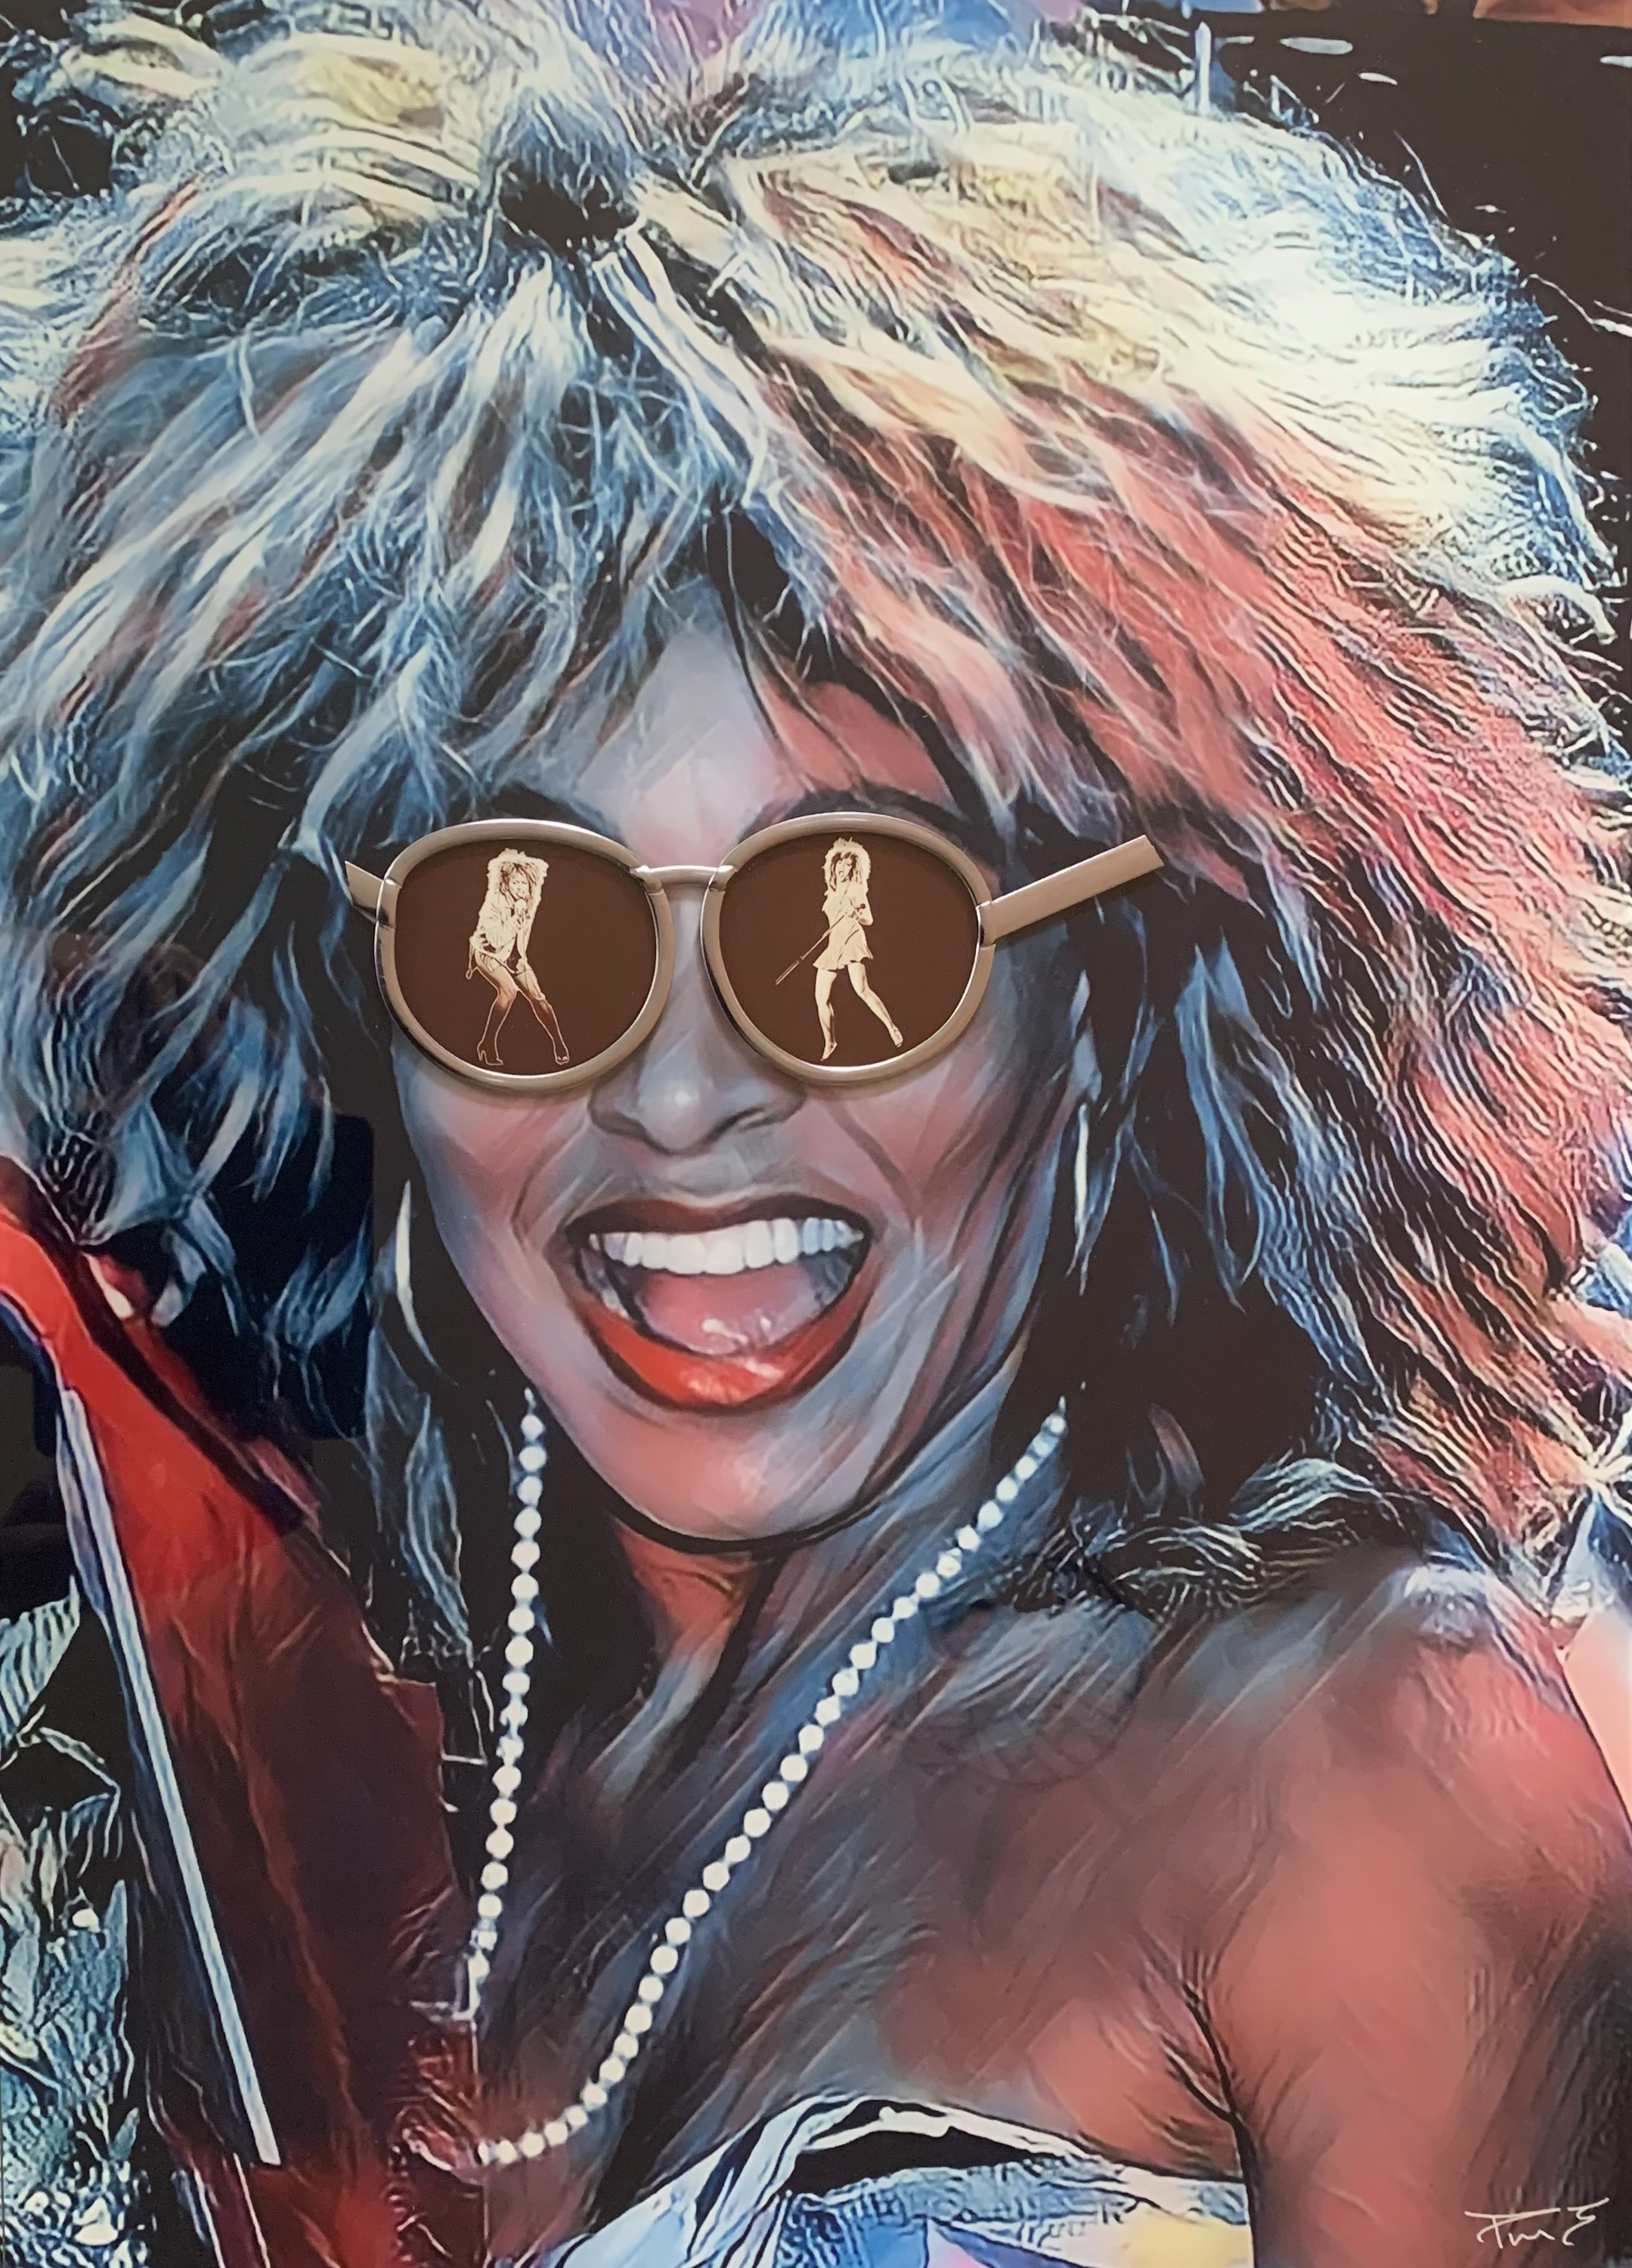 Tina Turner A3 by Paul Marshall Johnson, Print on Toughened Glass with Original lead work